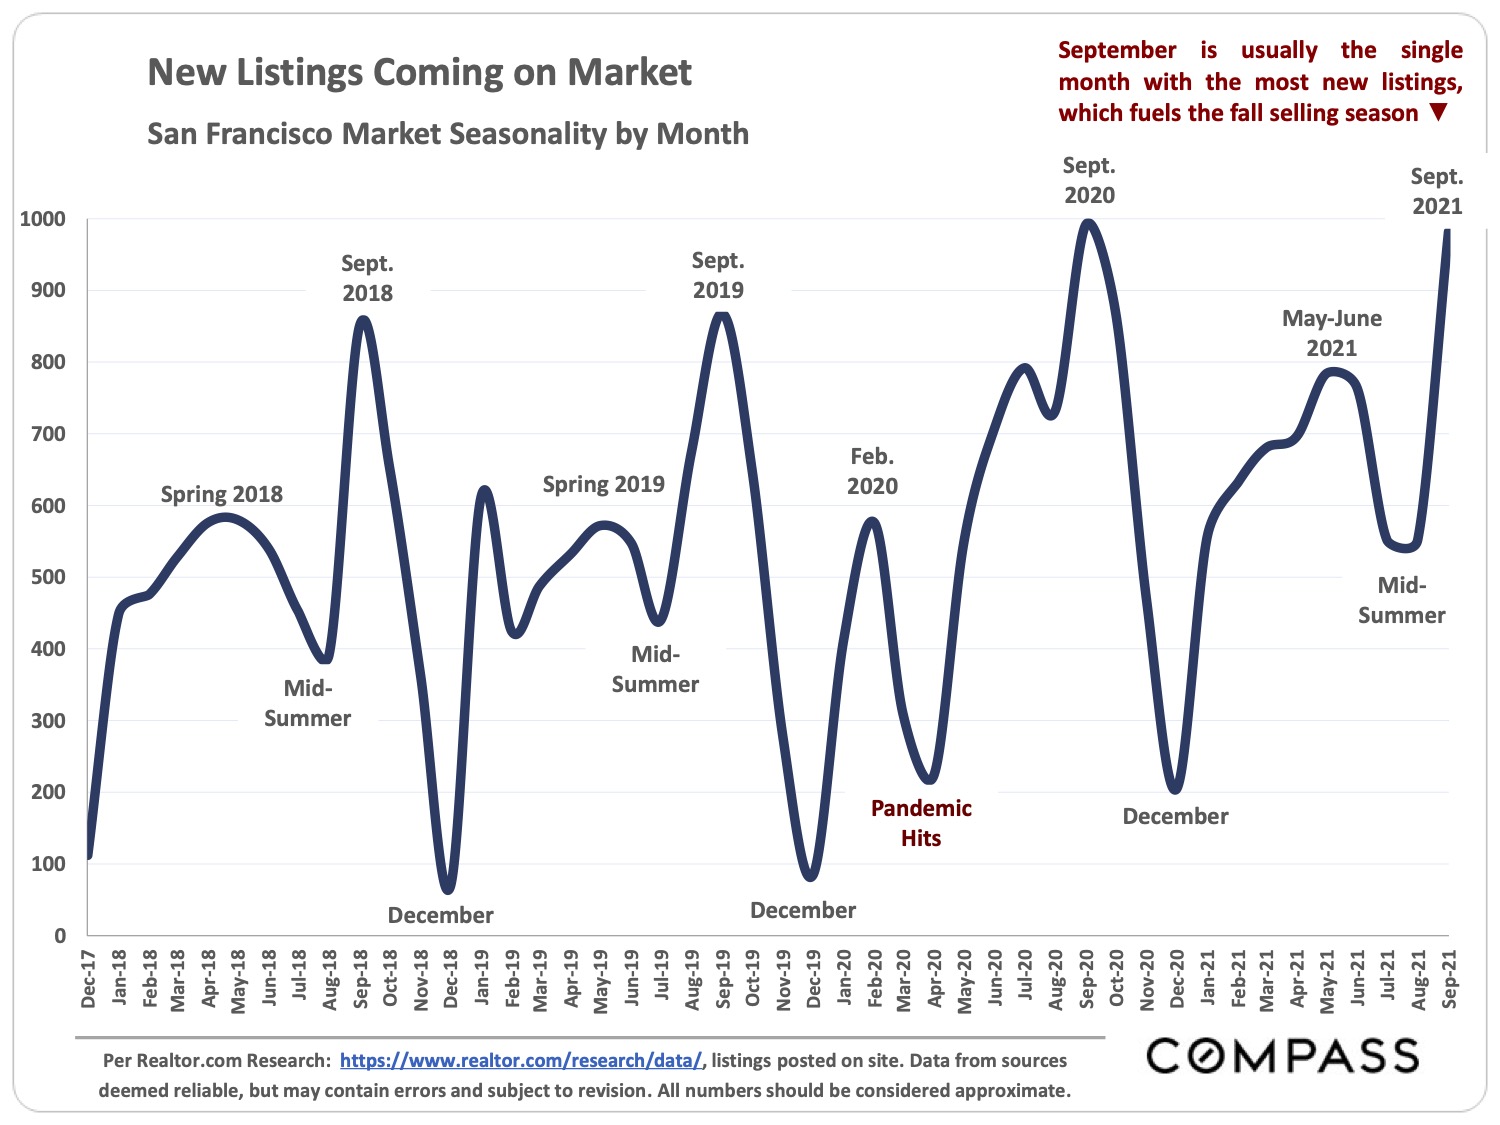 New Listings Coming on Market - San Francisco Market Seasonality By Month